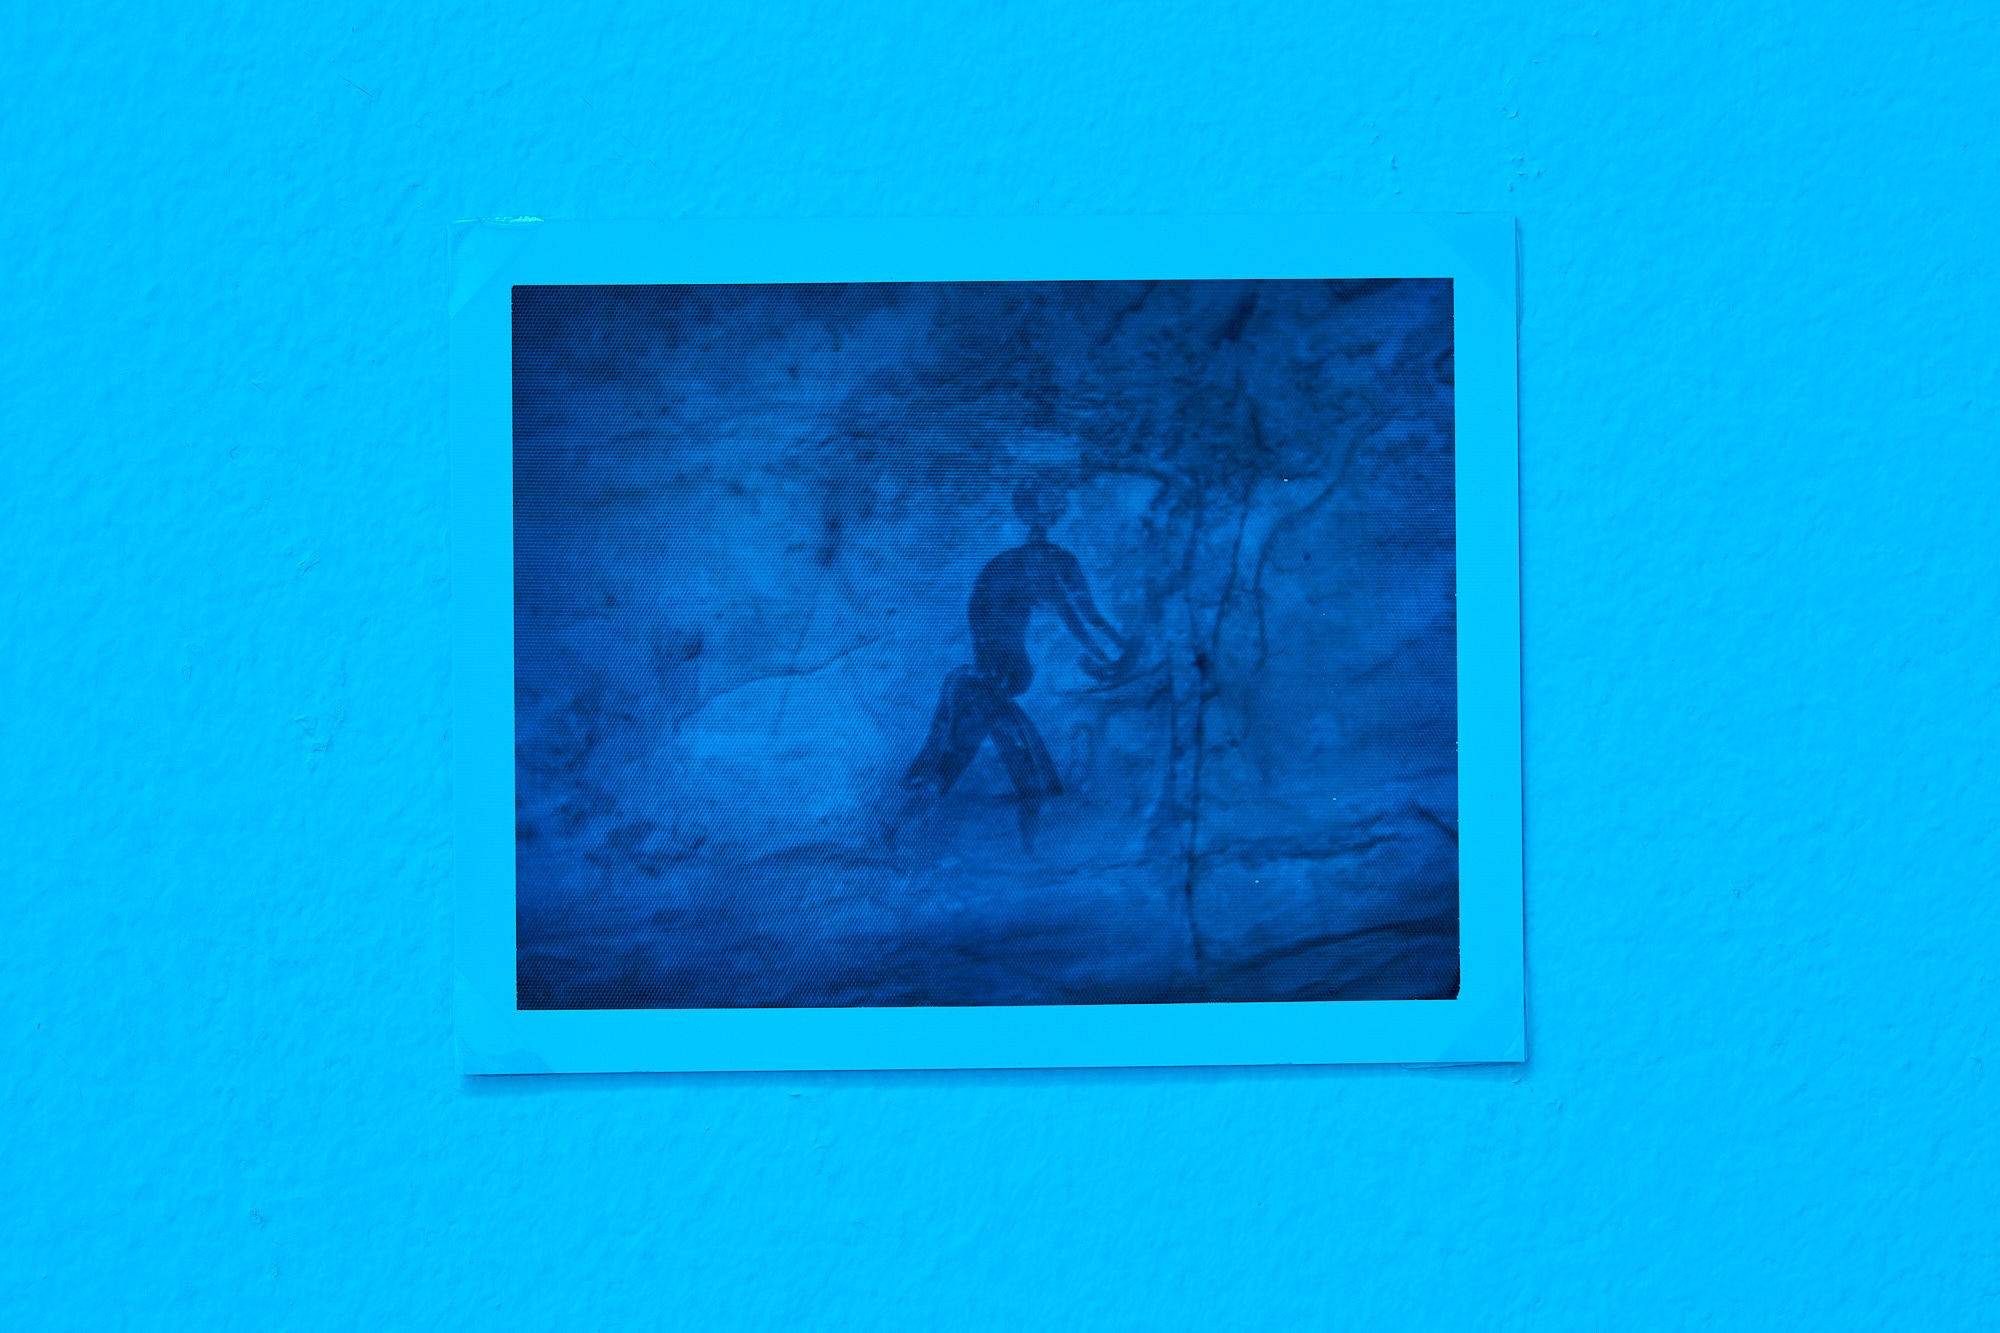 an image of what appears to be a primitive cave painting hangs on the wall in a room with blue tint